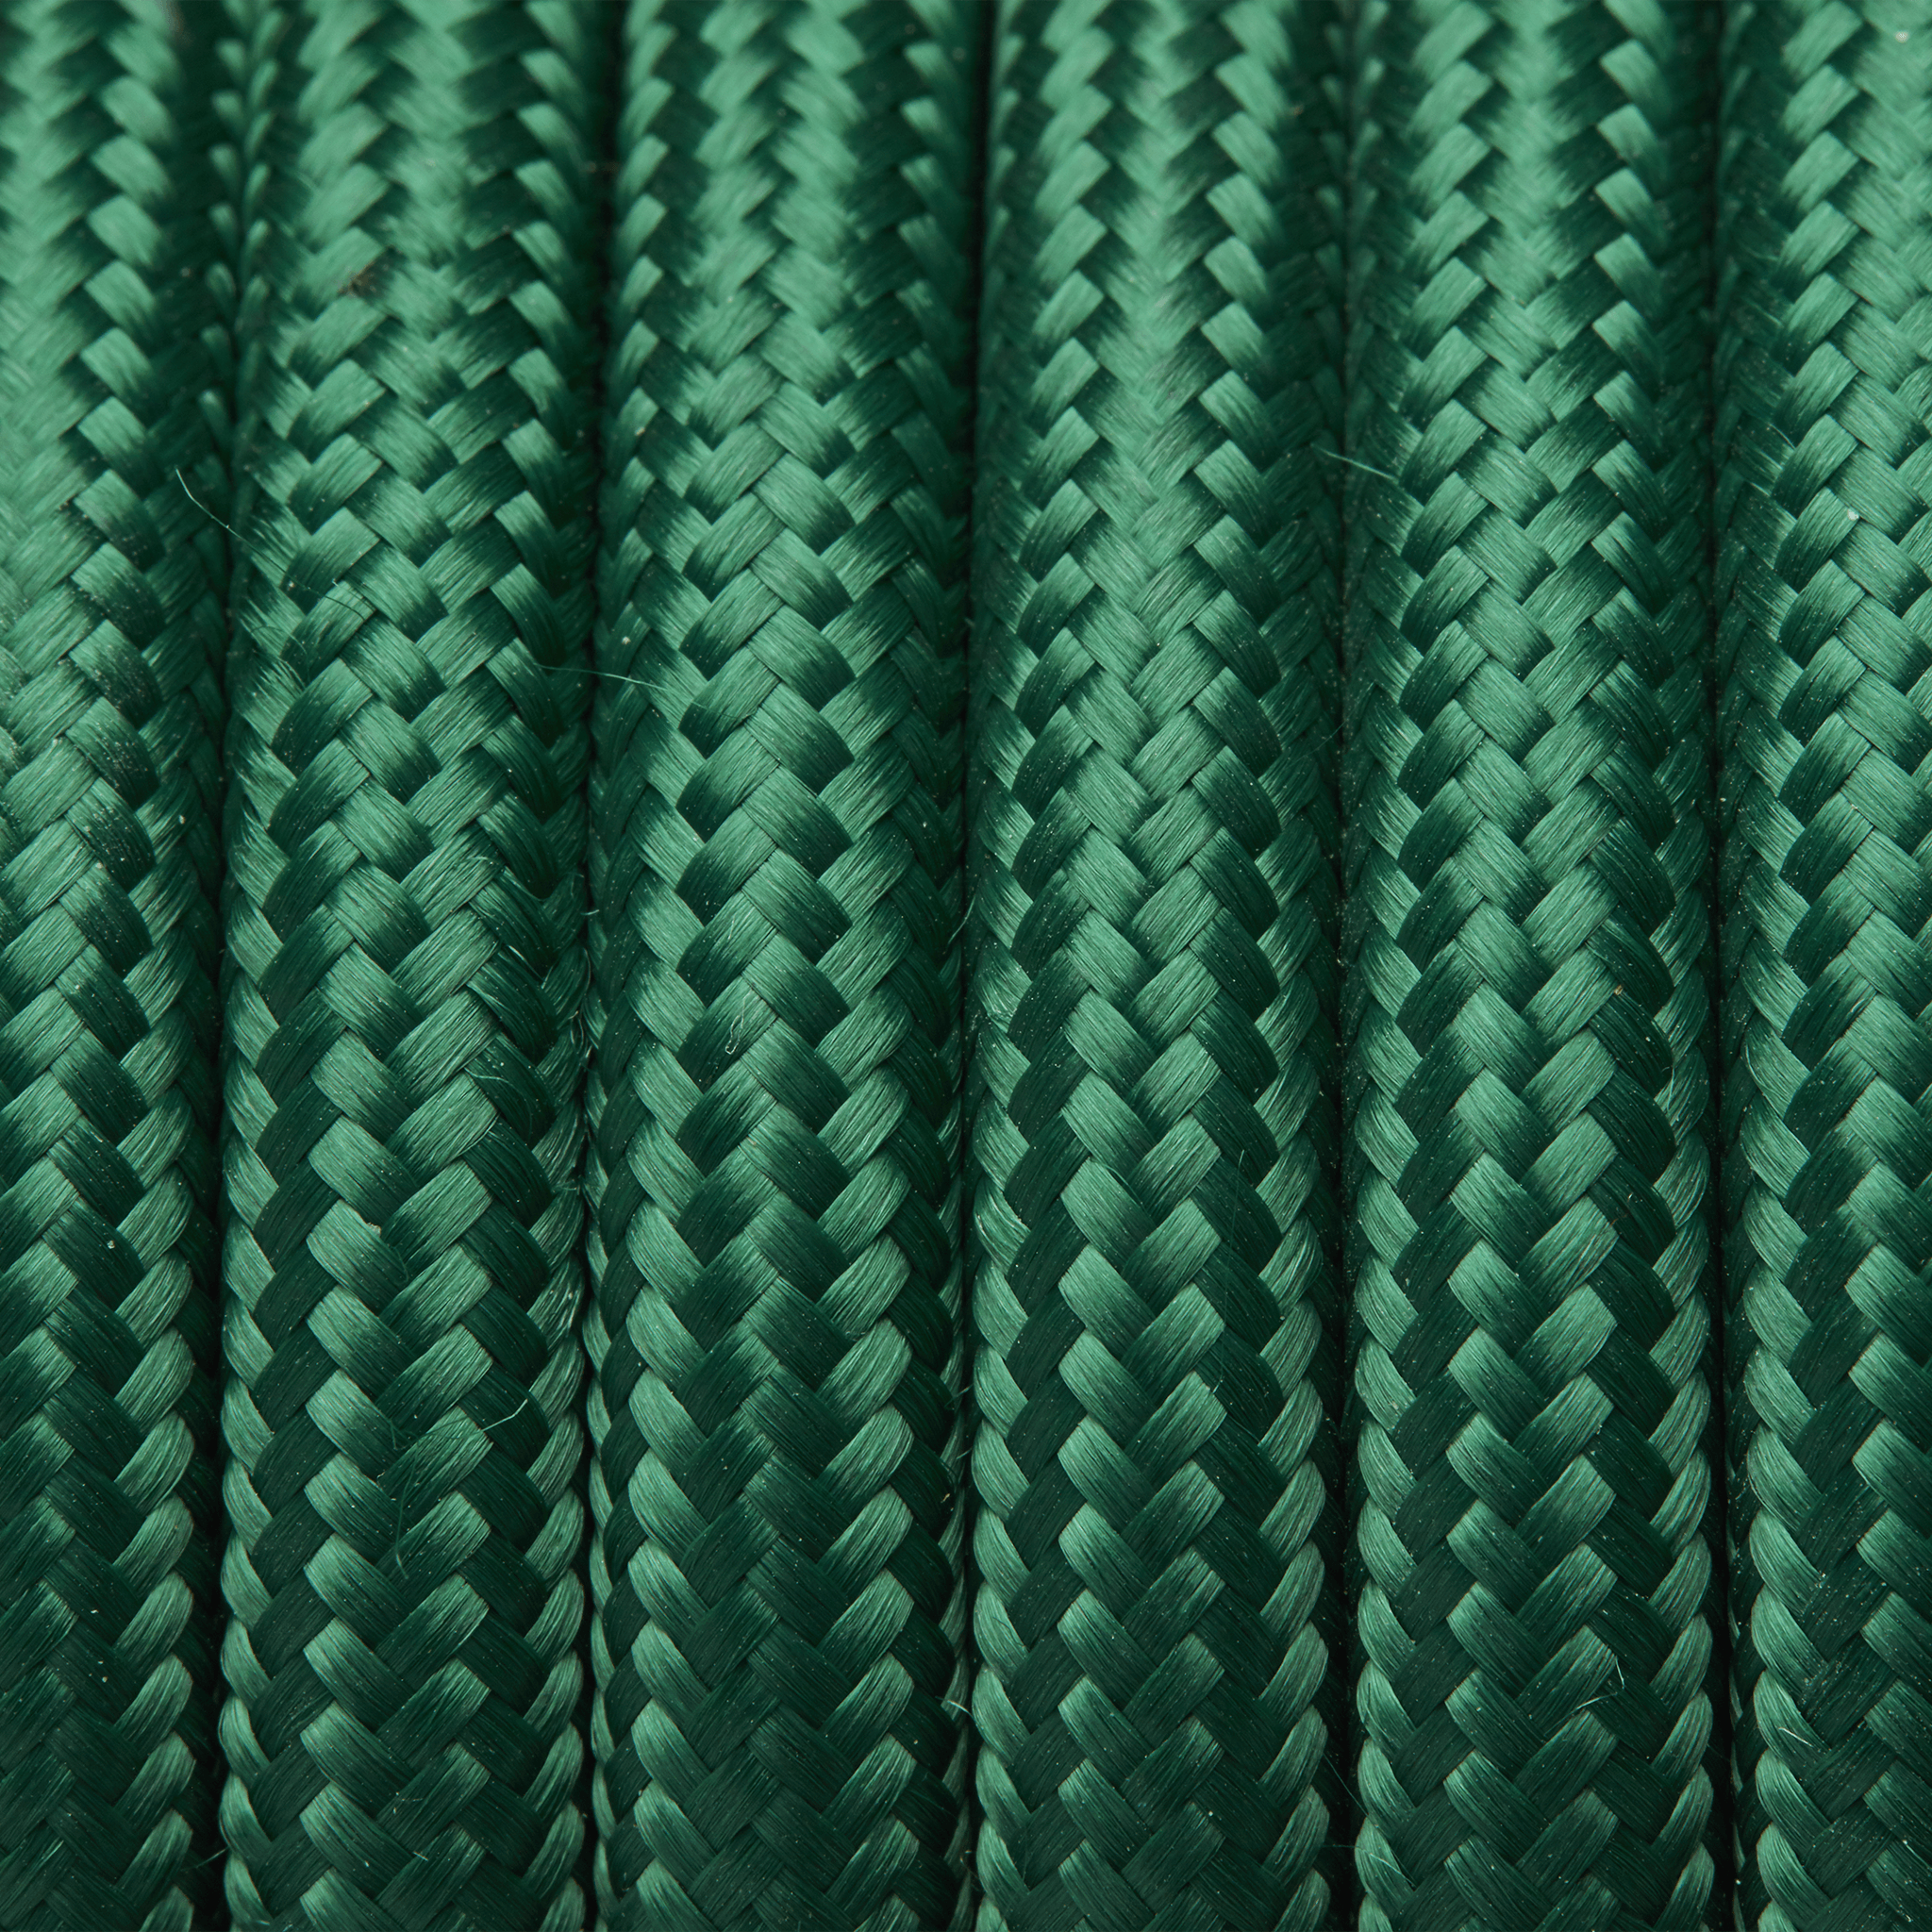 Industville – Round Fabric Flex – 3 Core Braided Cloth Cable Lighting Wire – Fabric Flex Cable – Green Colour – Braided Woven Cloth Material – 100 CM